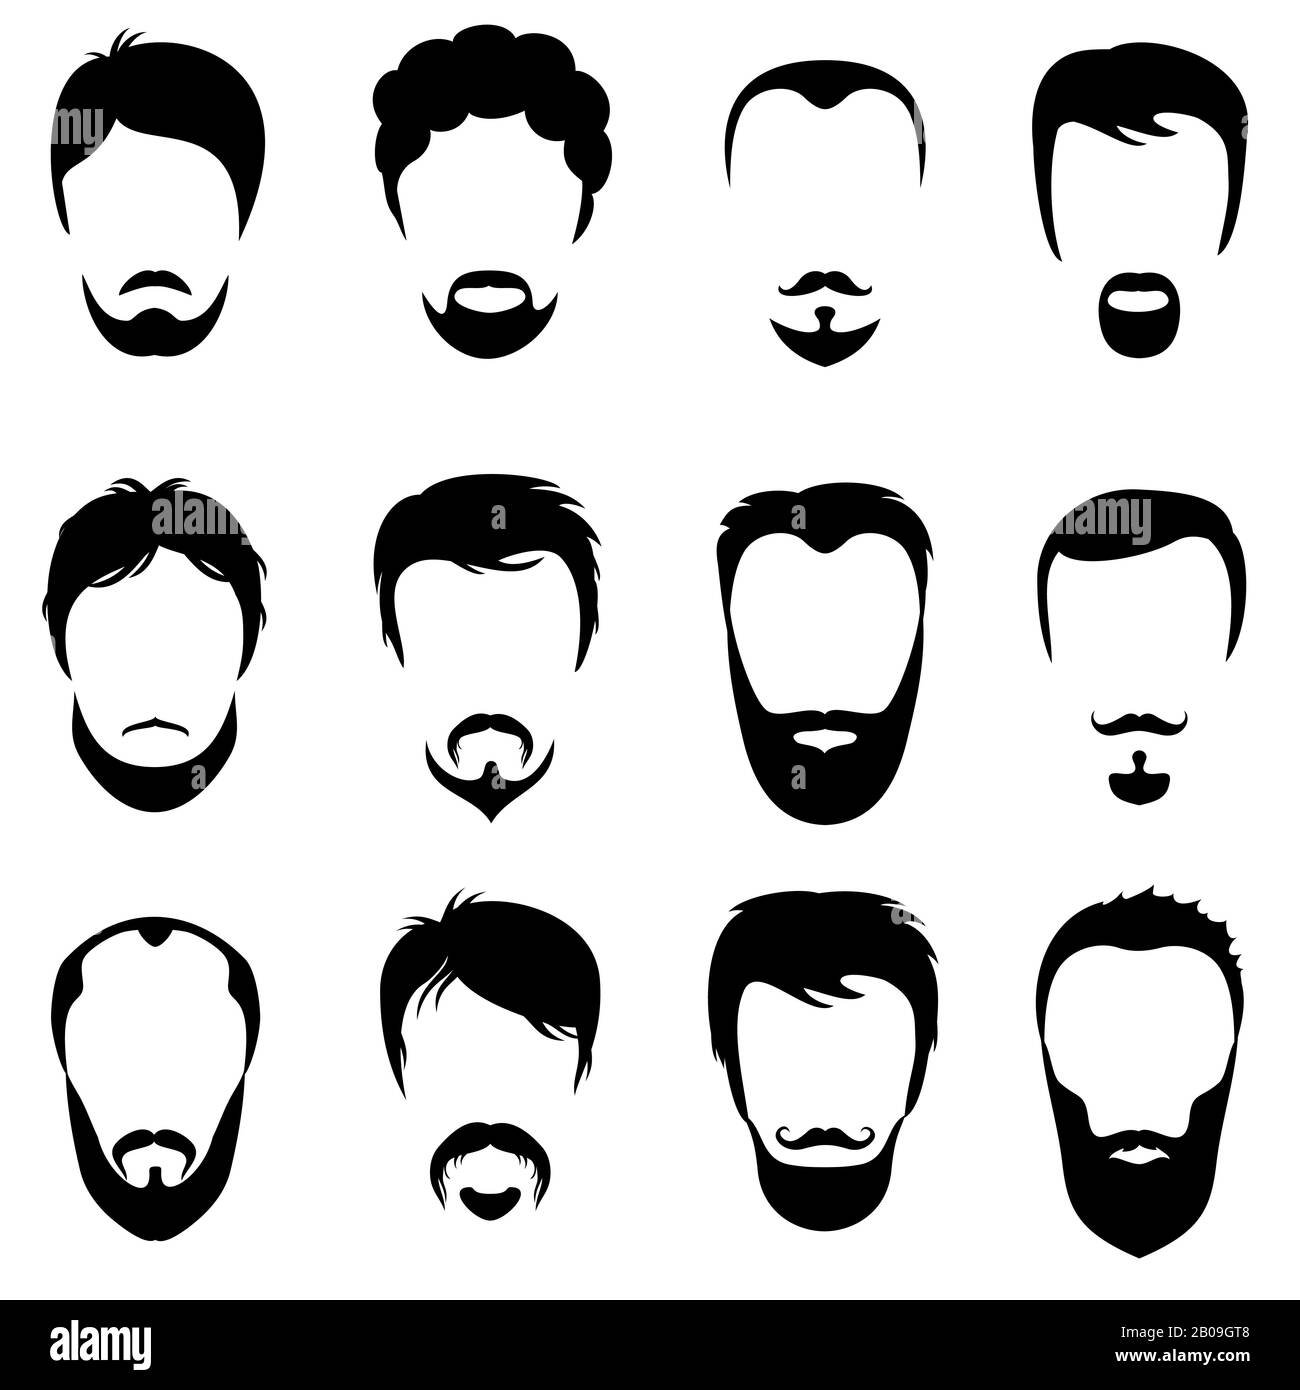 Design constructor with men vector silhouette shapes of haircuts. Fashion black beard and mustache illustration Stock Vector